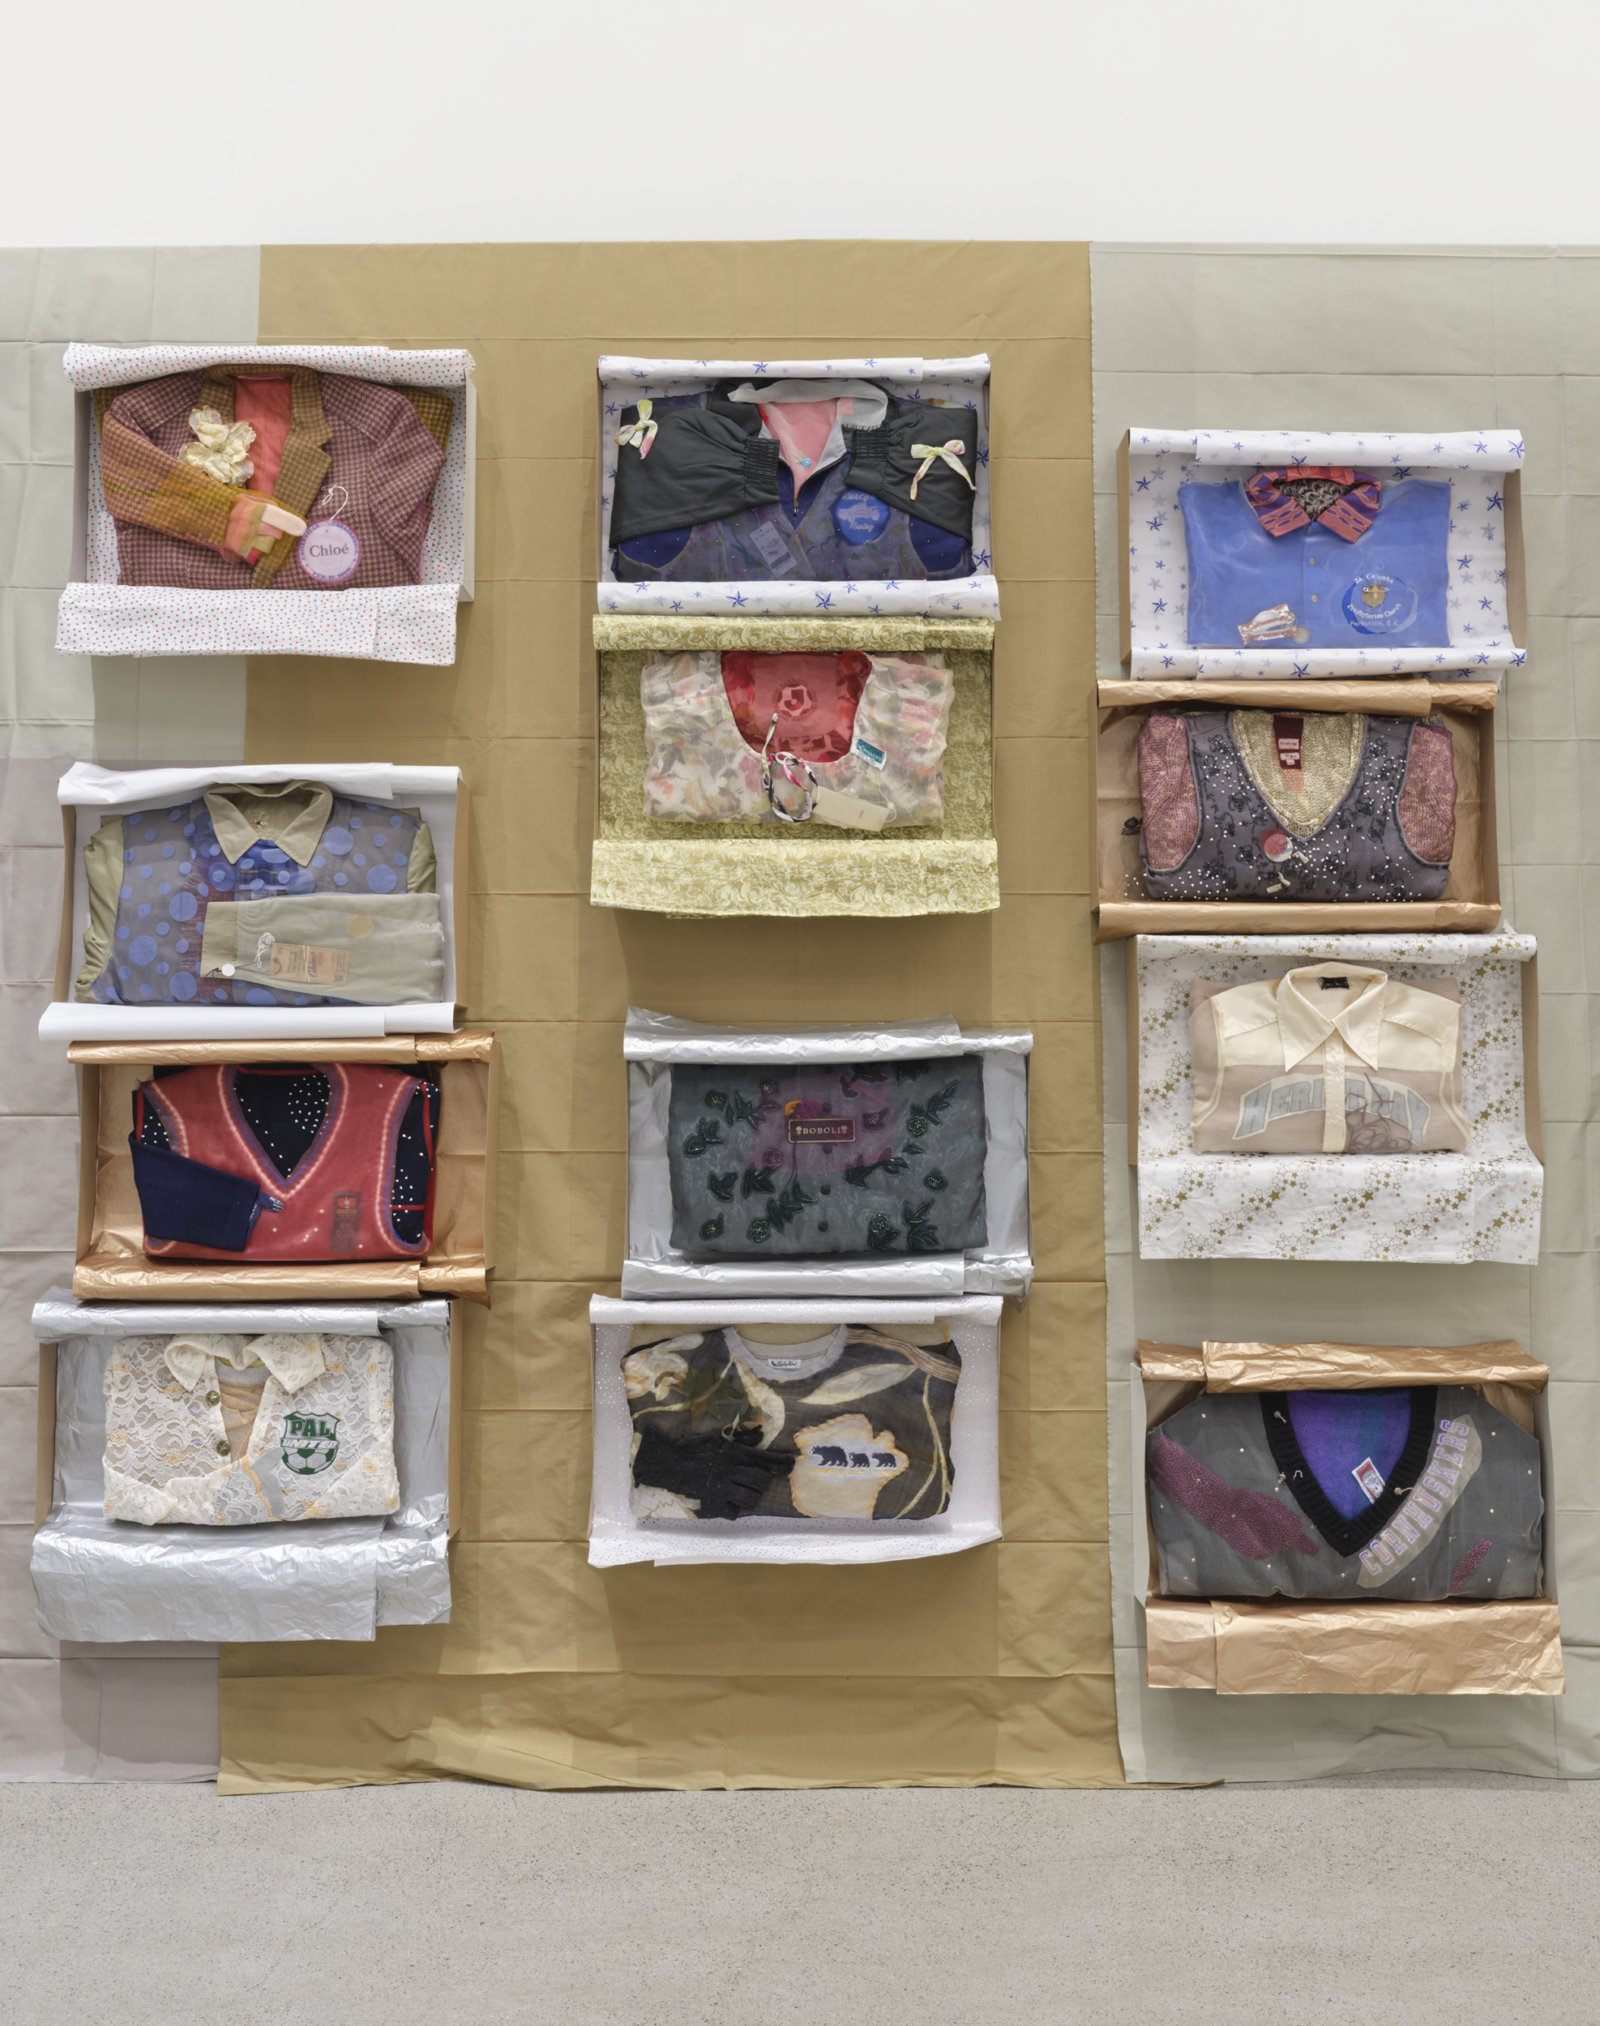 Liz Magor, Being This (detail), 2012/2022, paper, textiles, found materials, 96 x 432 x 22 in. (244 x 1097 x 56 cm)